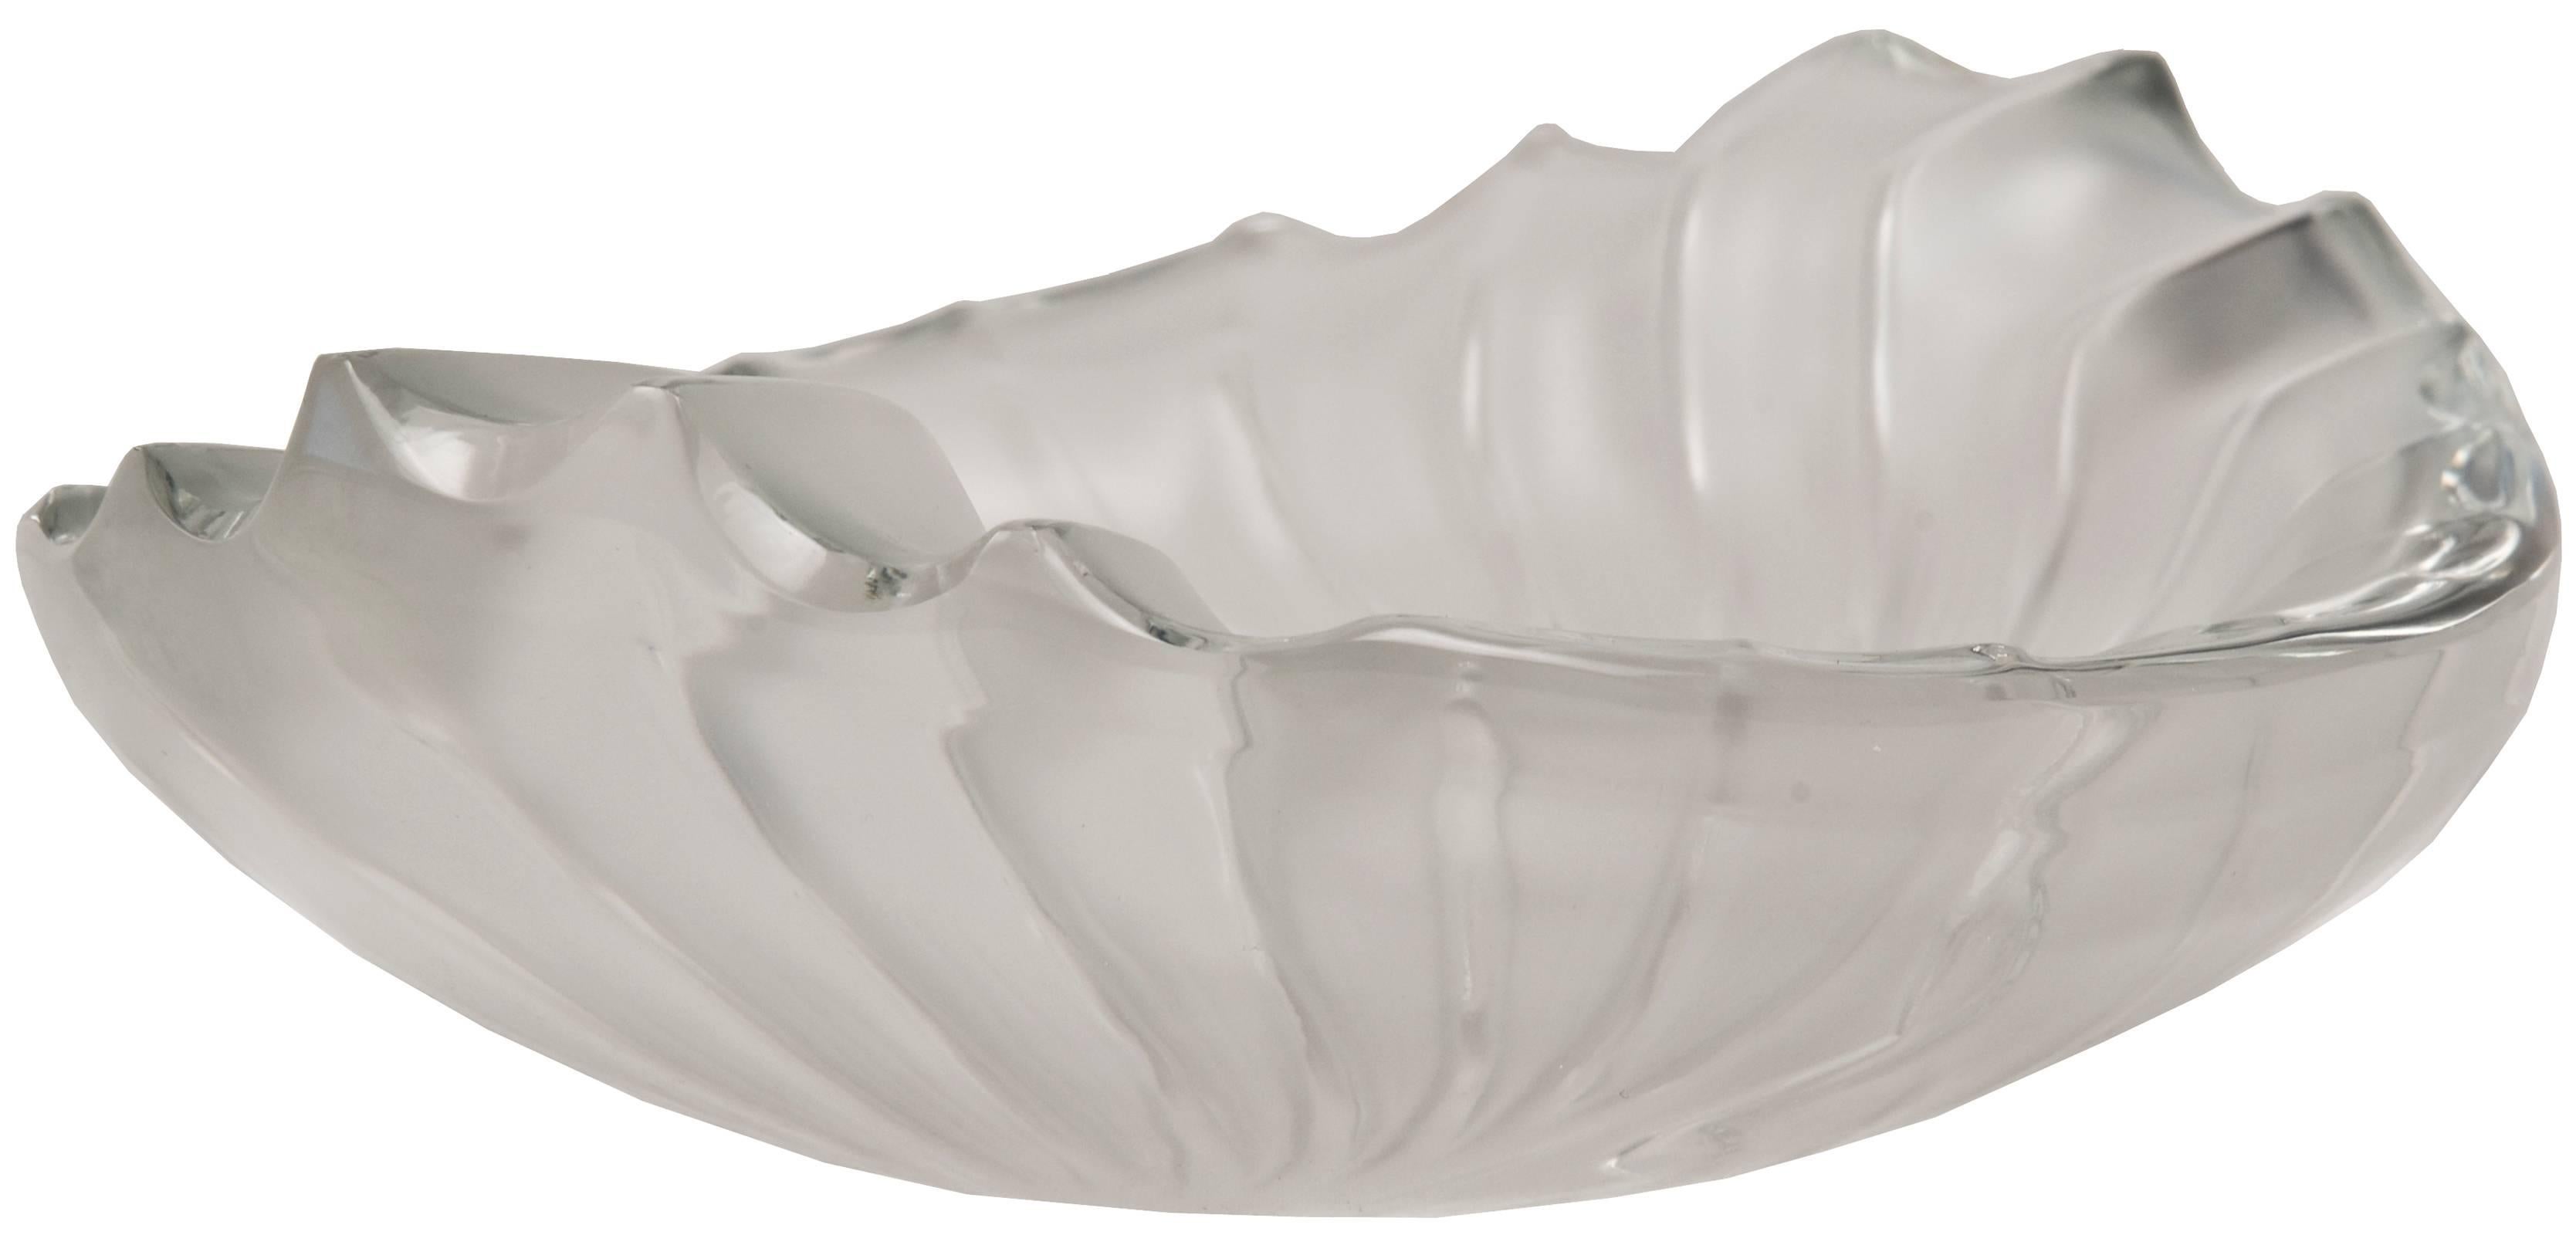 Lalique art Deco Frosted Crystal Centrepiece Bowl In Good Condition For Sale In Salt Lake City, UT